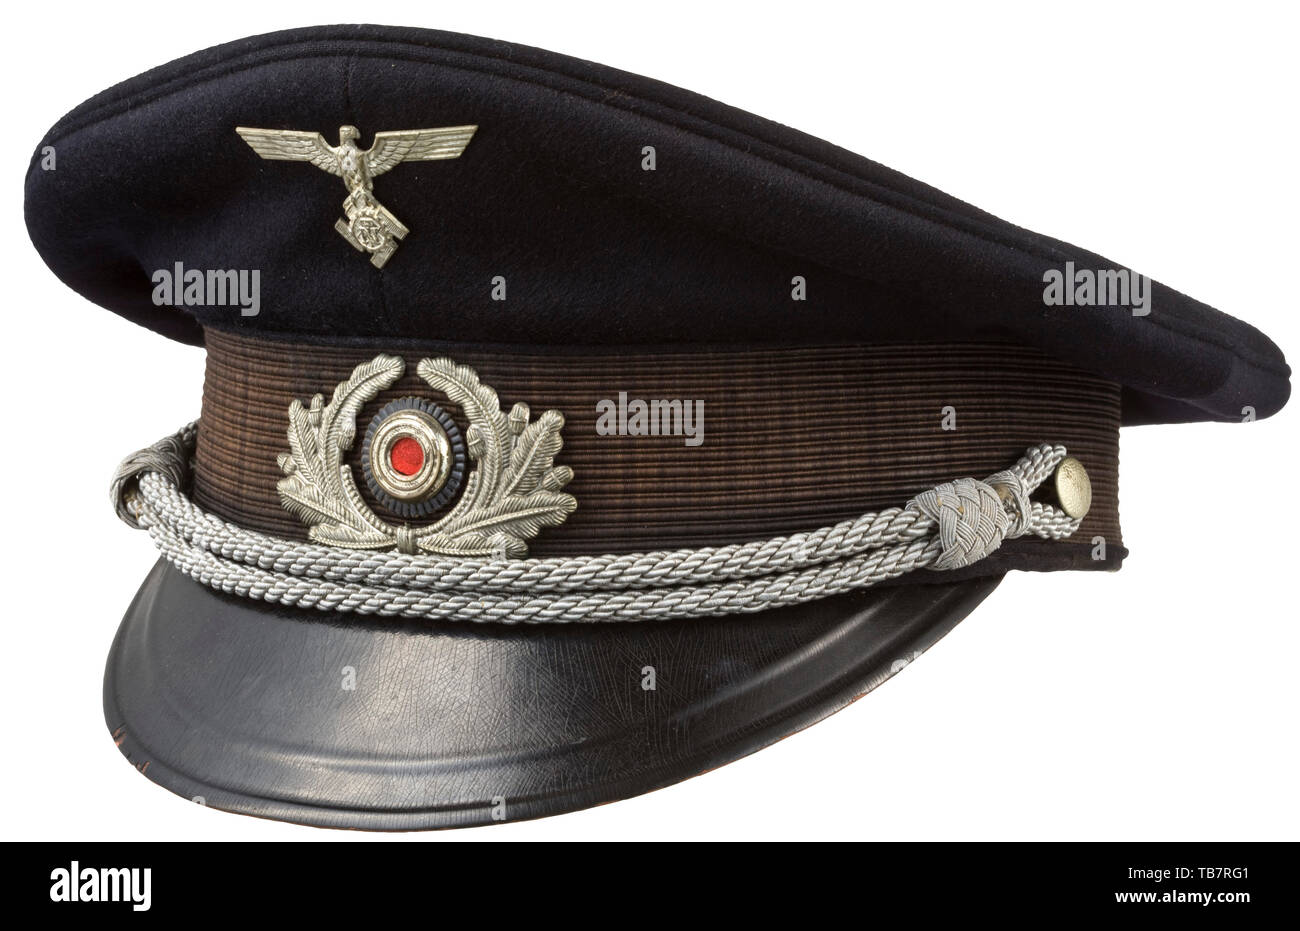 A visor cap for leaders, Dark-blue top, trim band of black silk rep, the metal insignia silver-plated, commander's cap cord (in the rank of officer). Lacquered plastic front visor, brown leather sweatband, violet-coloured silk lining with cap trapezoid and manufacturer's mark 'Erel Sonderklasse, ges. gesch.'. Size circa 57. Hardly worn, extremely rare head gear. 20th century, 1930s, 1940s, technical, technic, emergency aid, object, objects, stills, clipping, clippings, cut out, cut-out, cut-outs, utensil, piece of equipment, utensils, organisation, organization, organizatio, Editorial-Use-Only Stock Photo